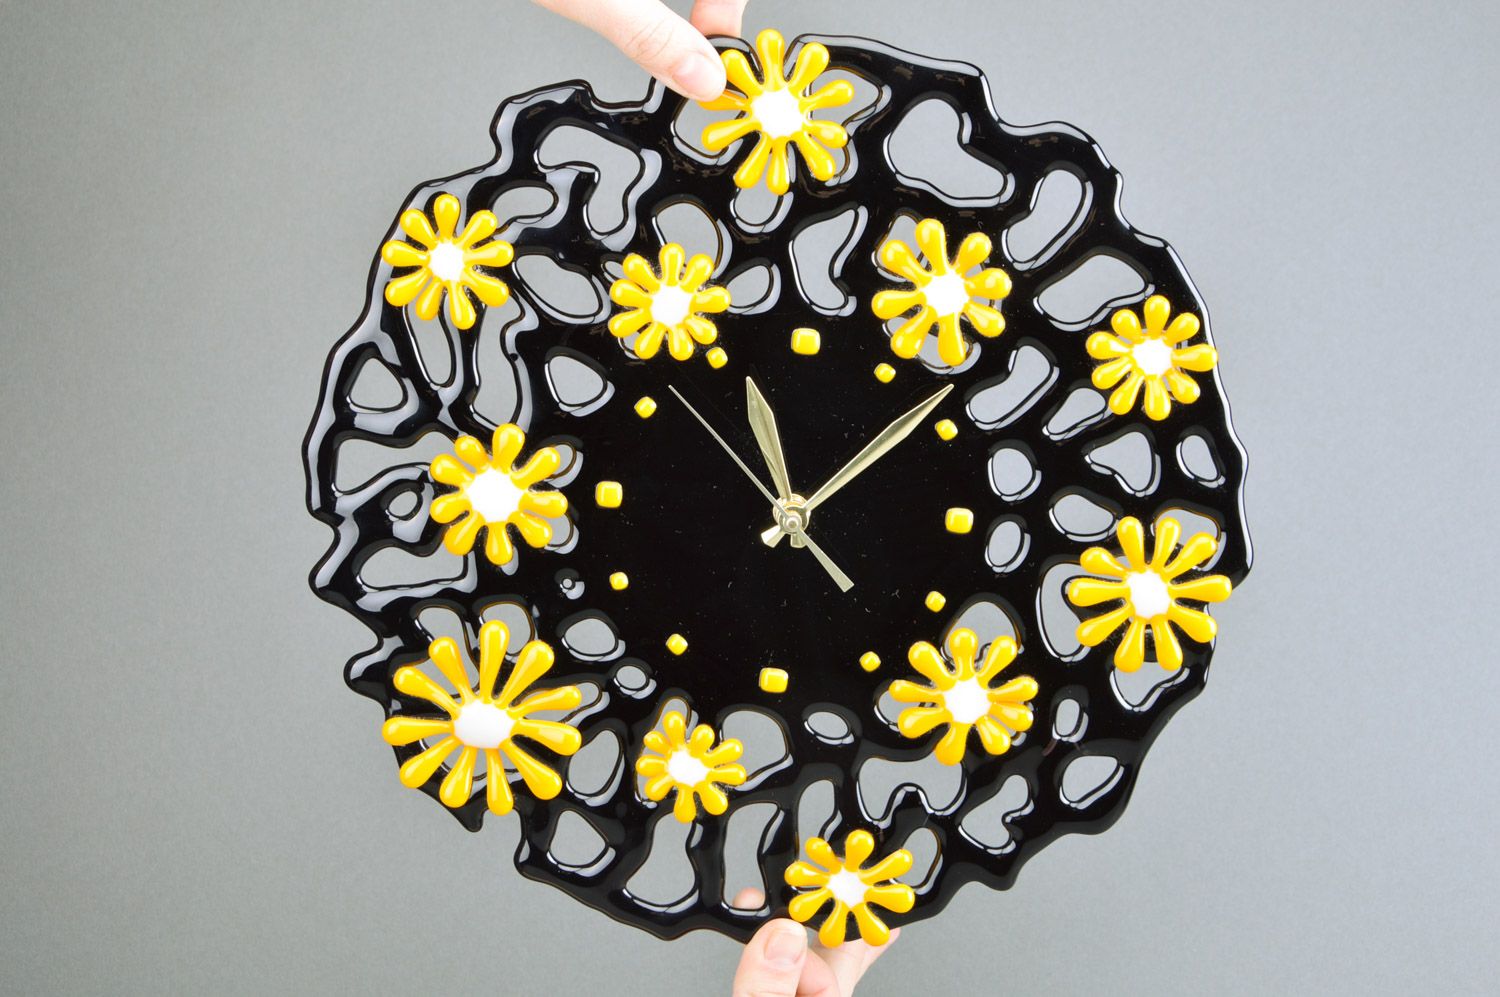 Handmade decorative round fused glass wall clock in black and yellow colors photo 3